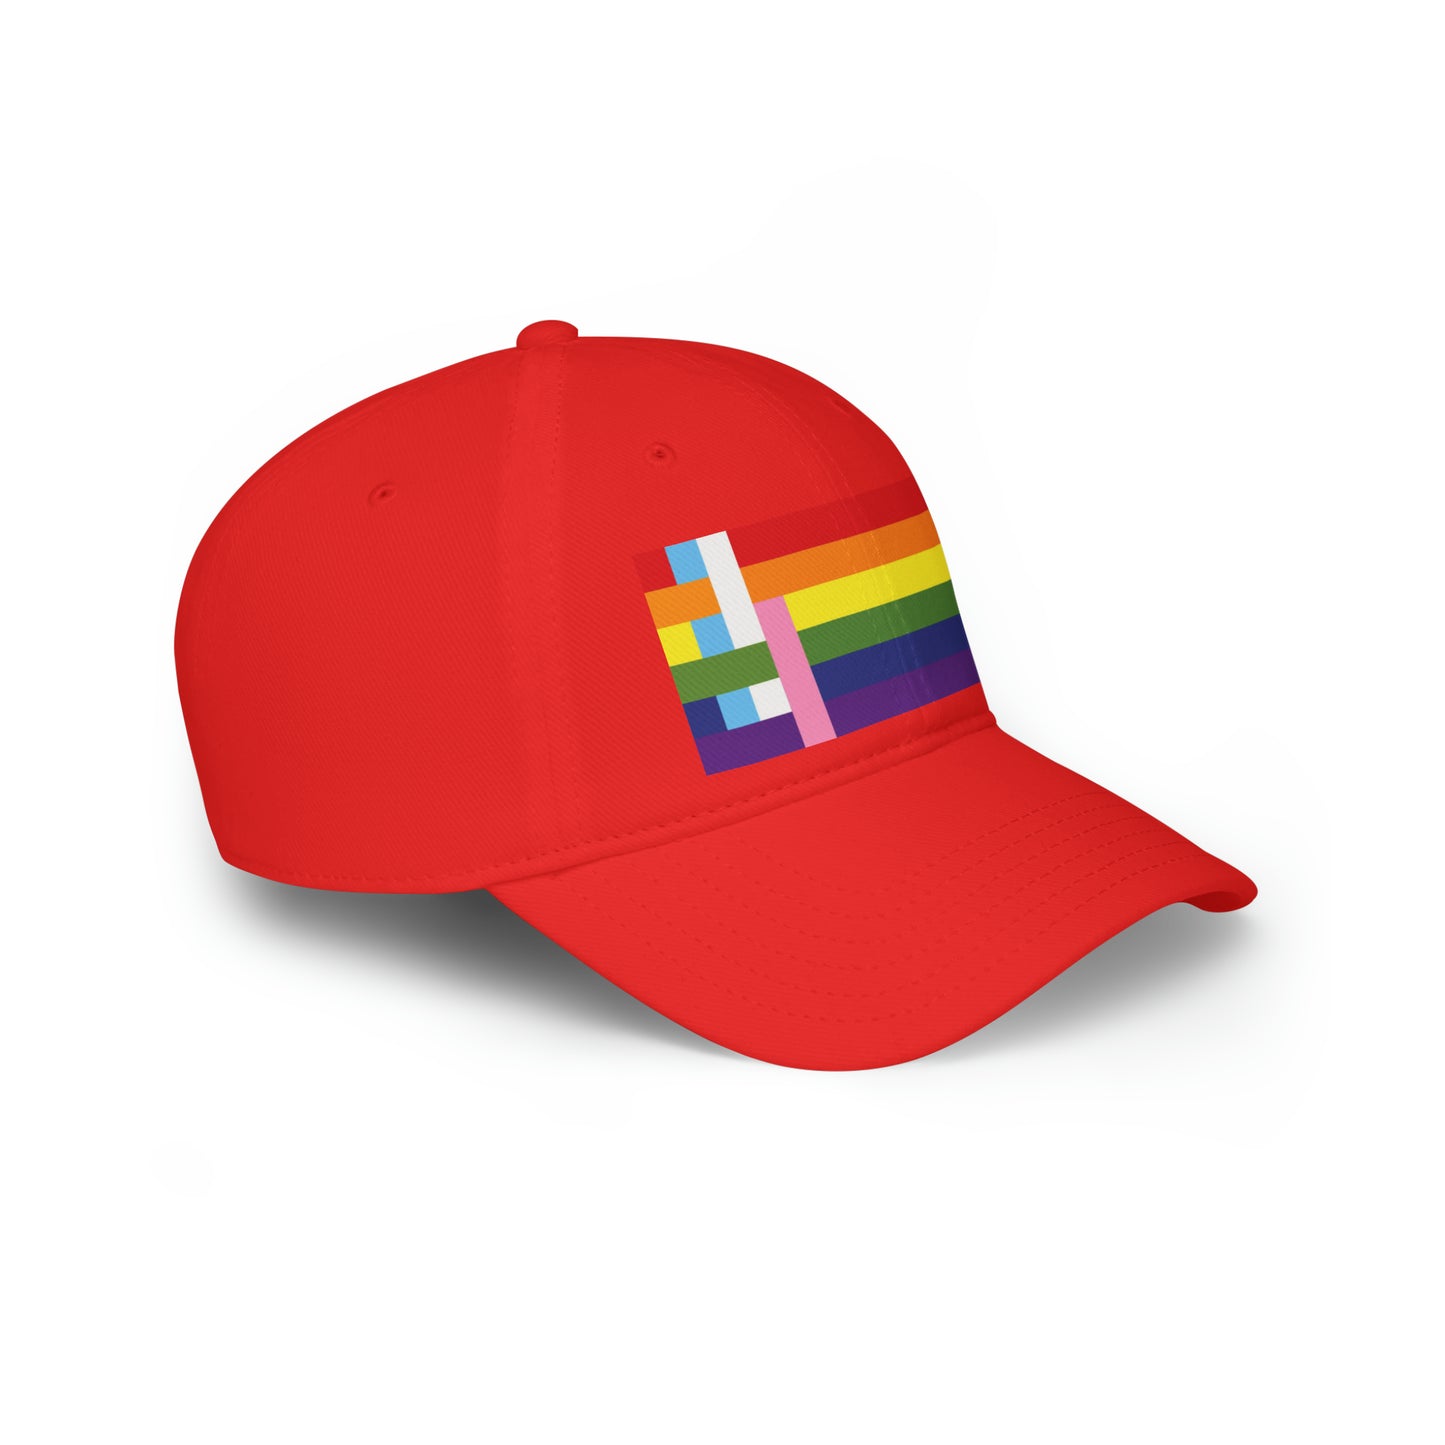 All in this together - Pride - Low Profile Baseball Cap